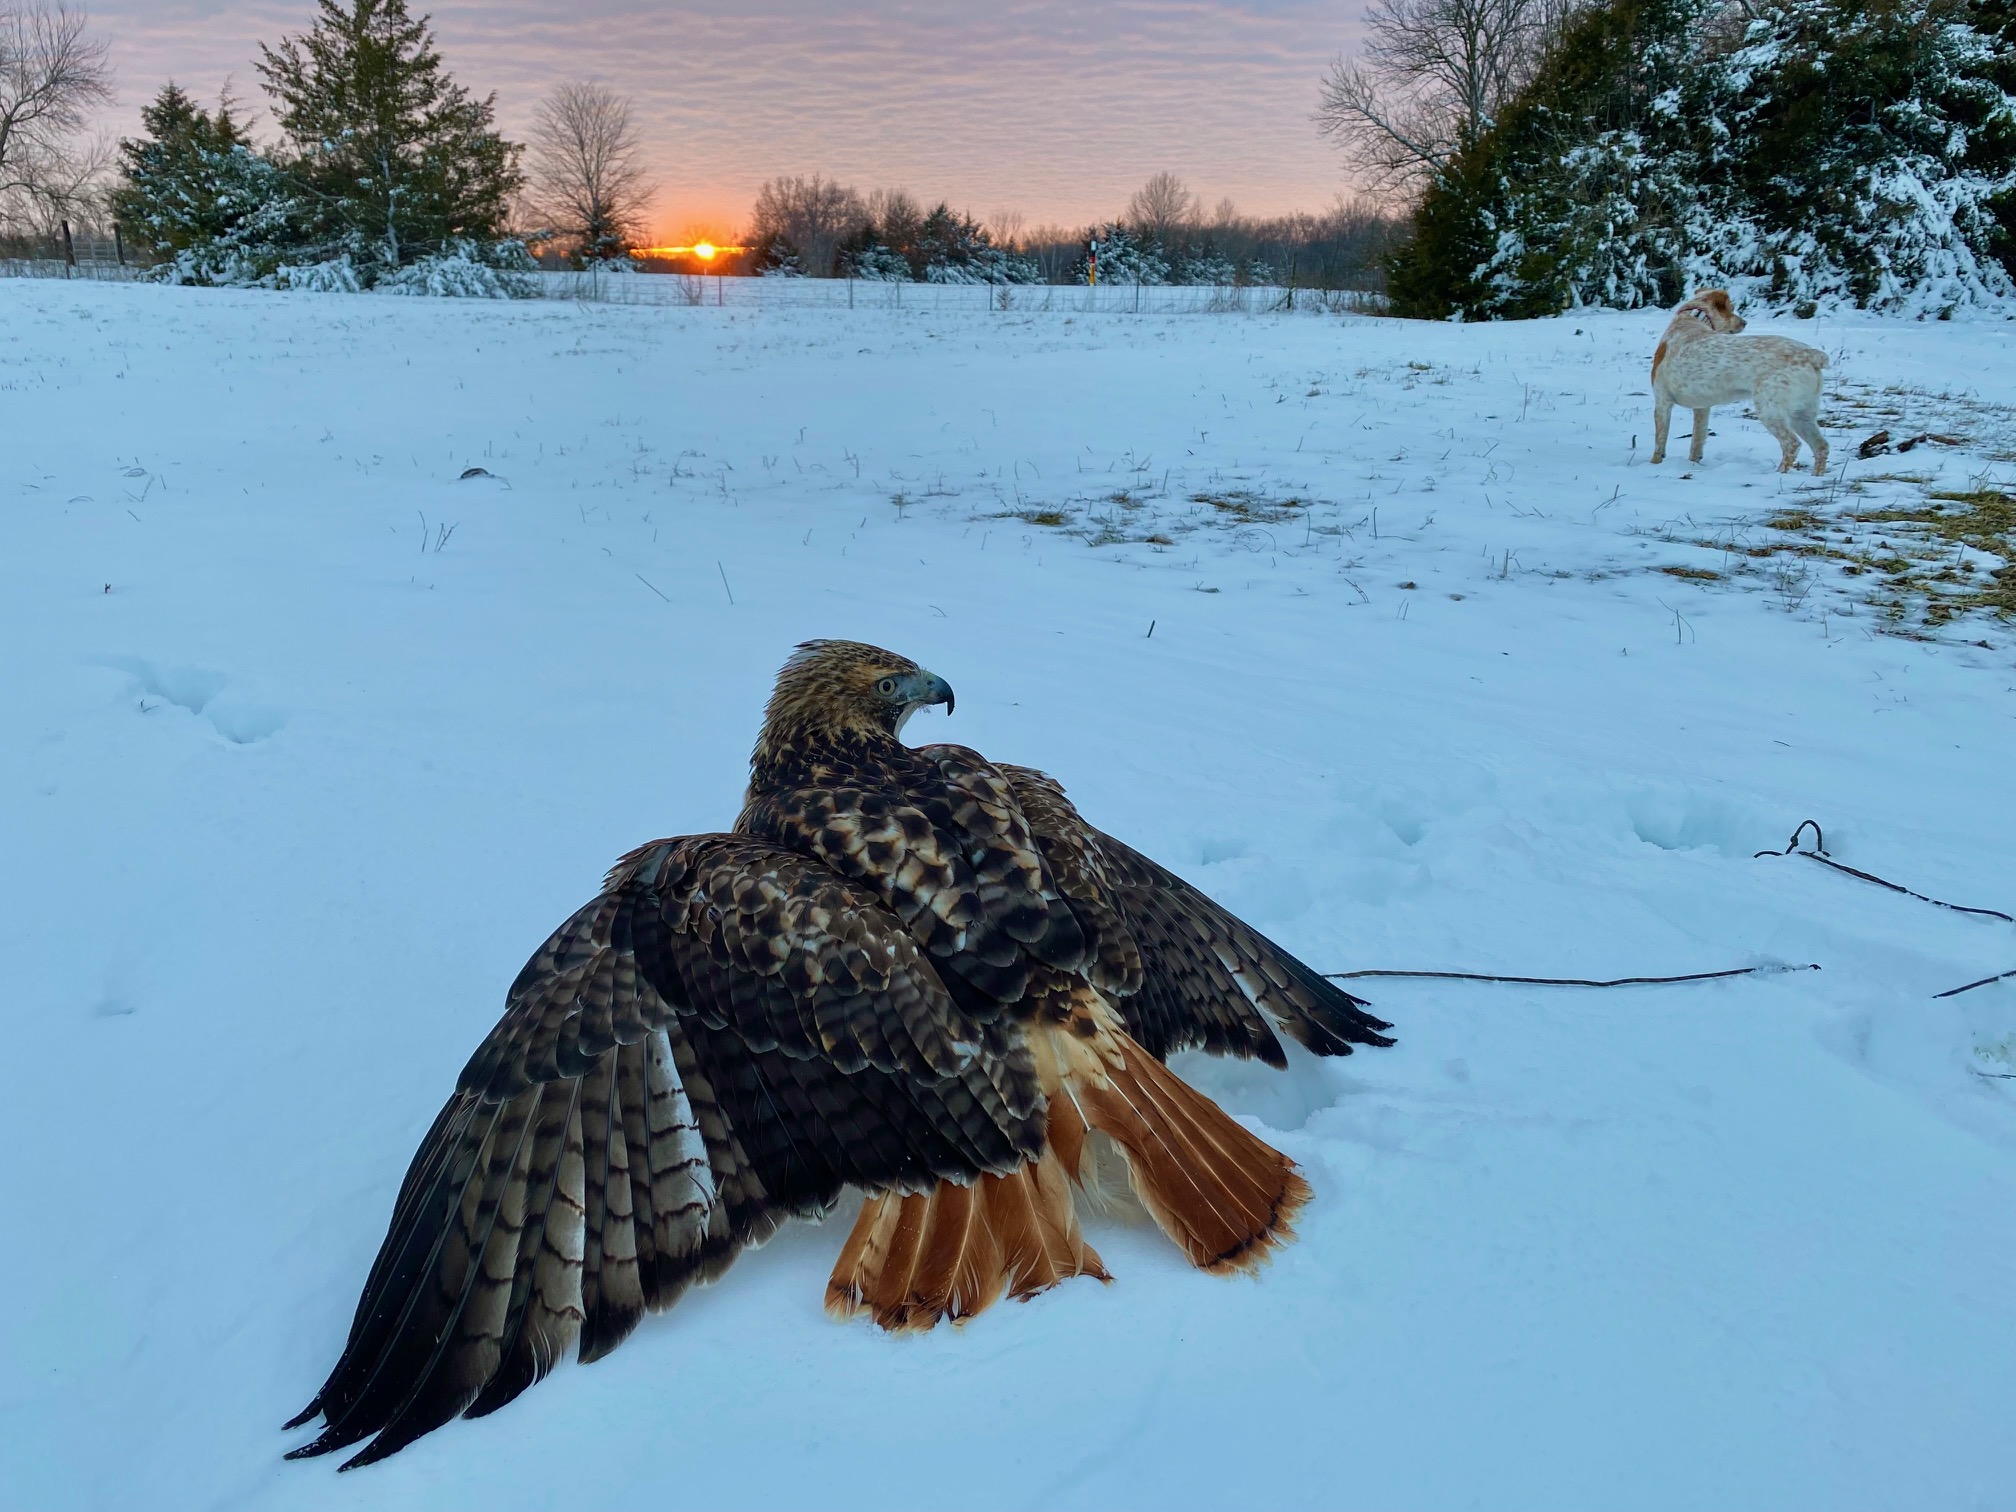 Caprica, red tailed hawk, in full adult plumage. Chasing the lure at sundown after an unsuccessful rabbit hunt. Winter 2022.